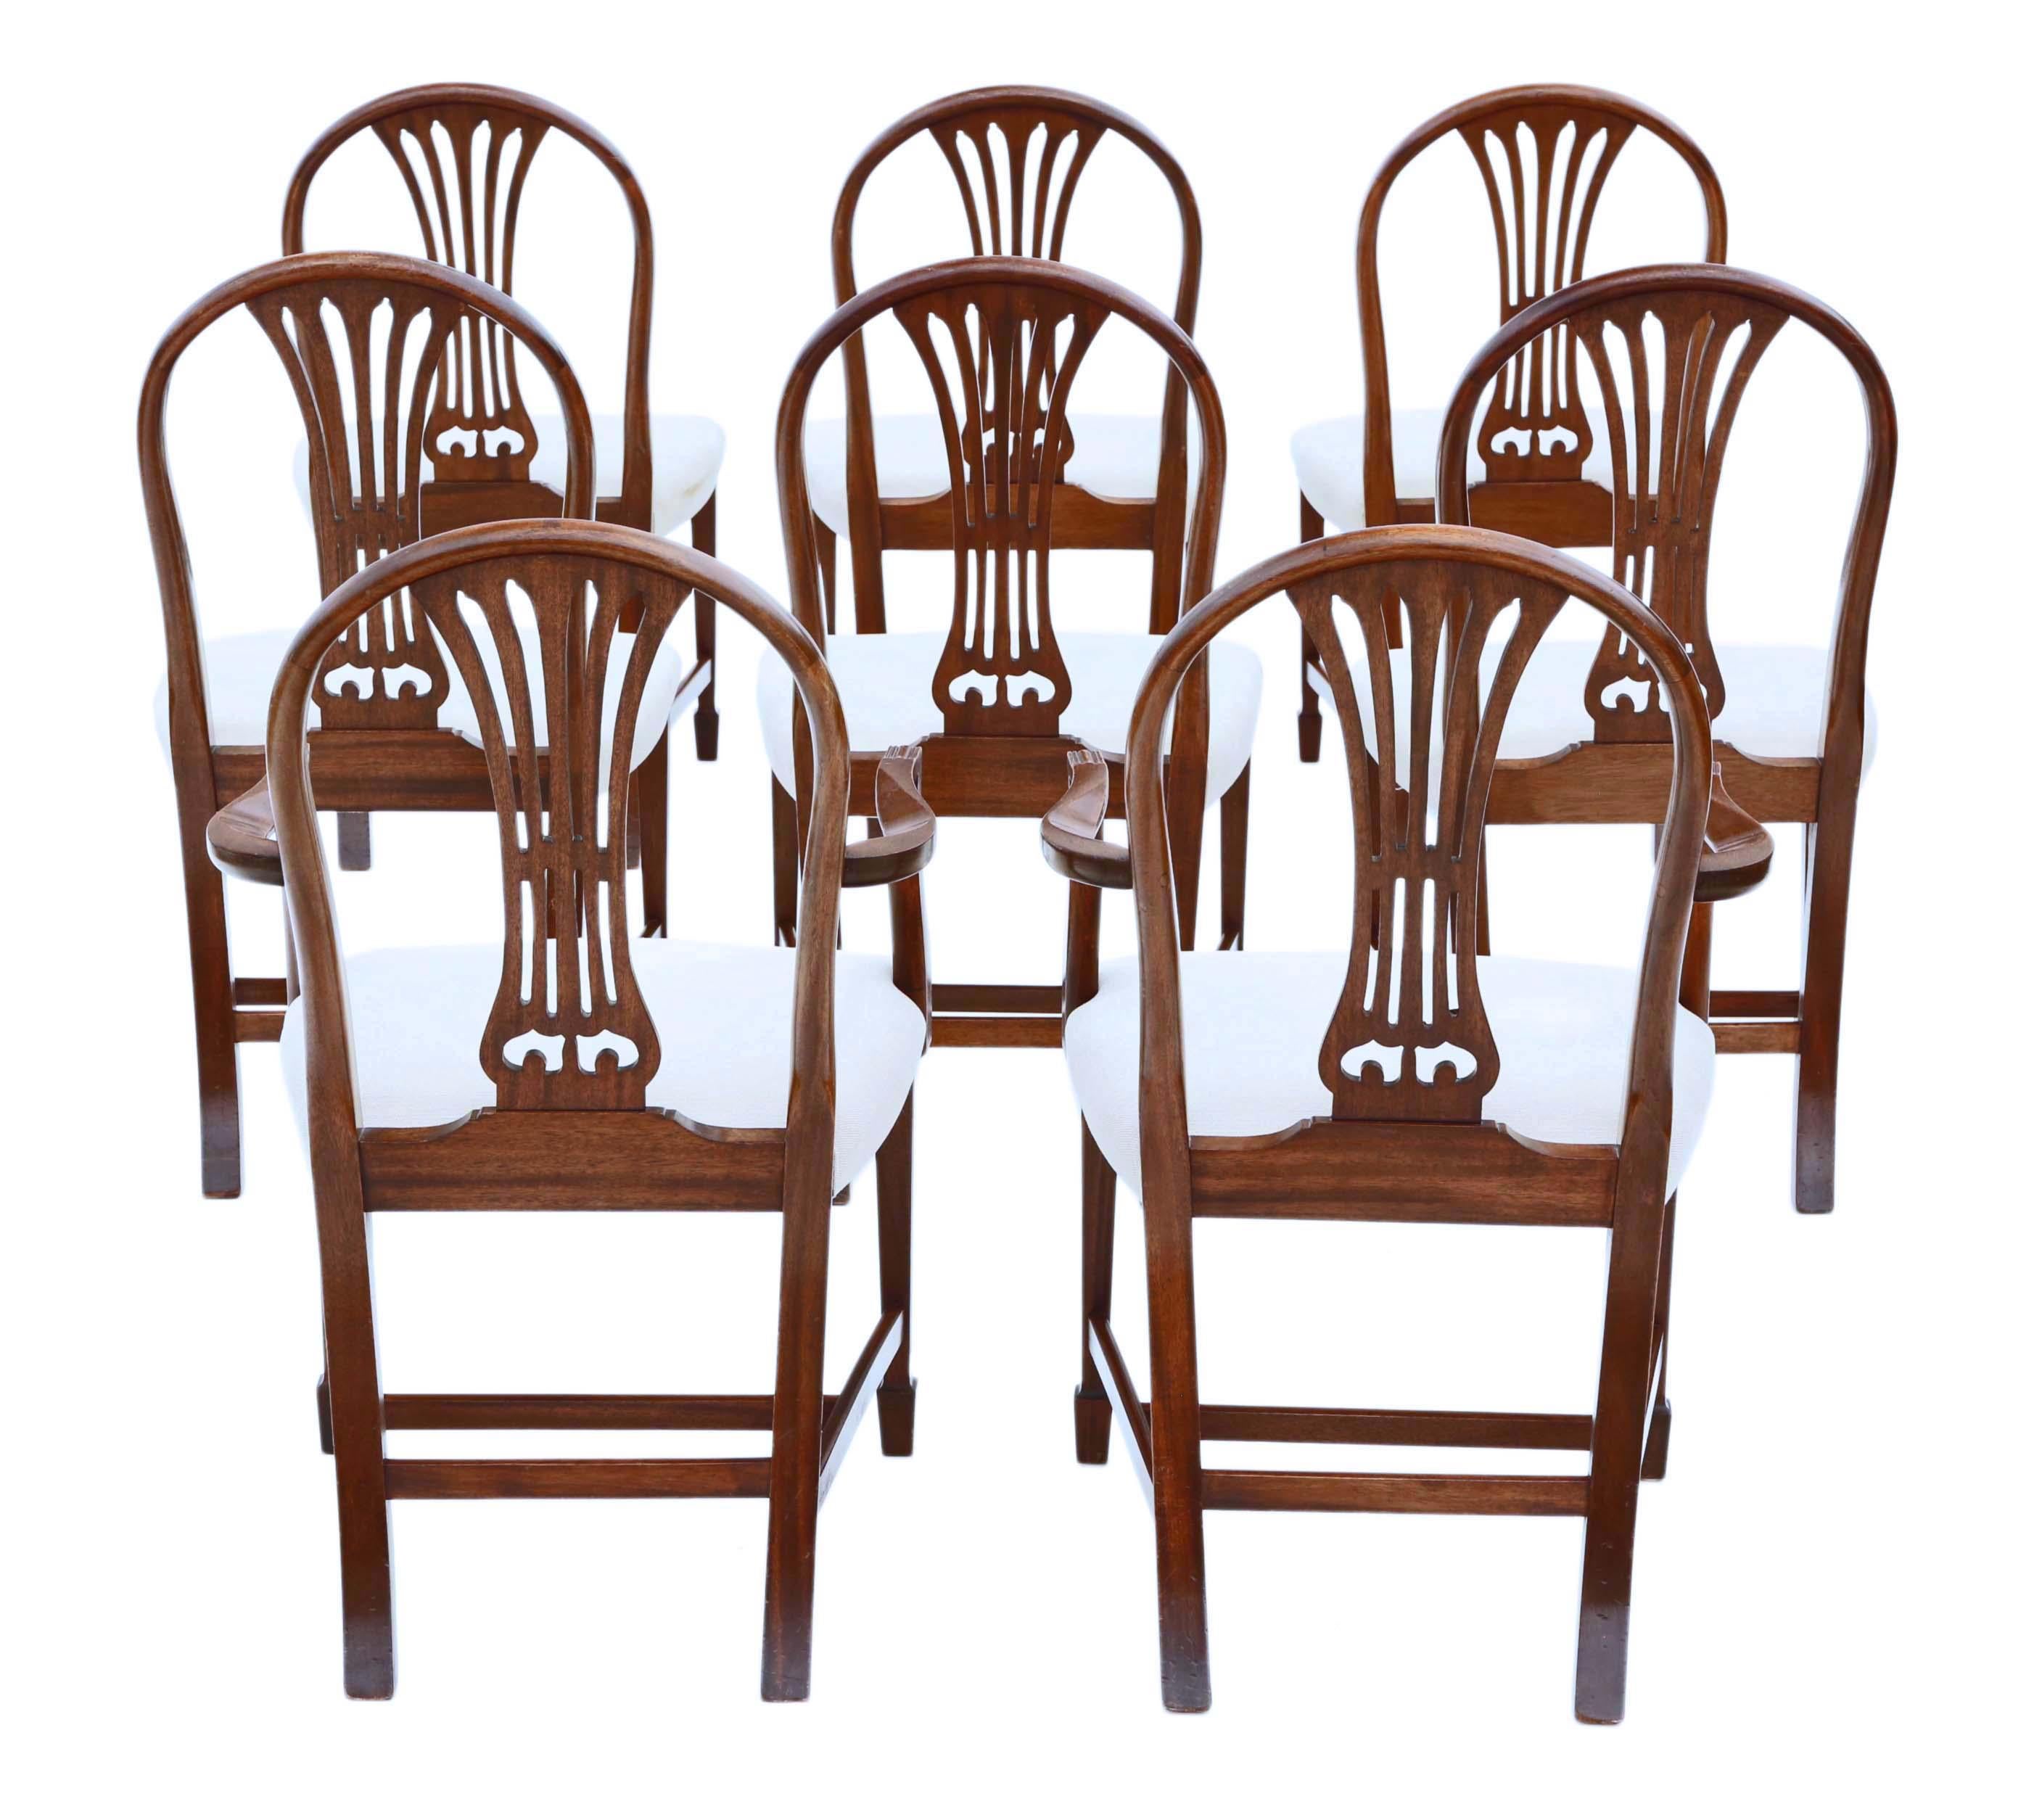 Antique fine quality set of 8 (6 + 2) Georgian revival mahogany dining chairs mid 20th Century.

No loose joints or woodworm.

Upholstery is not new, but has no significant wear or major marks (we can get the seats re-upholstered in your